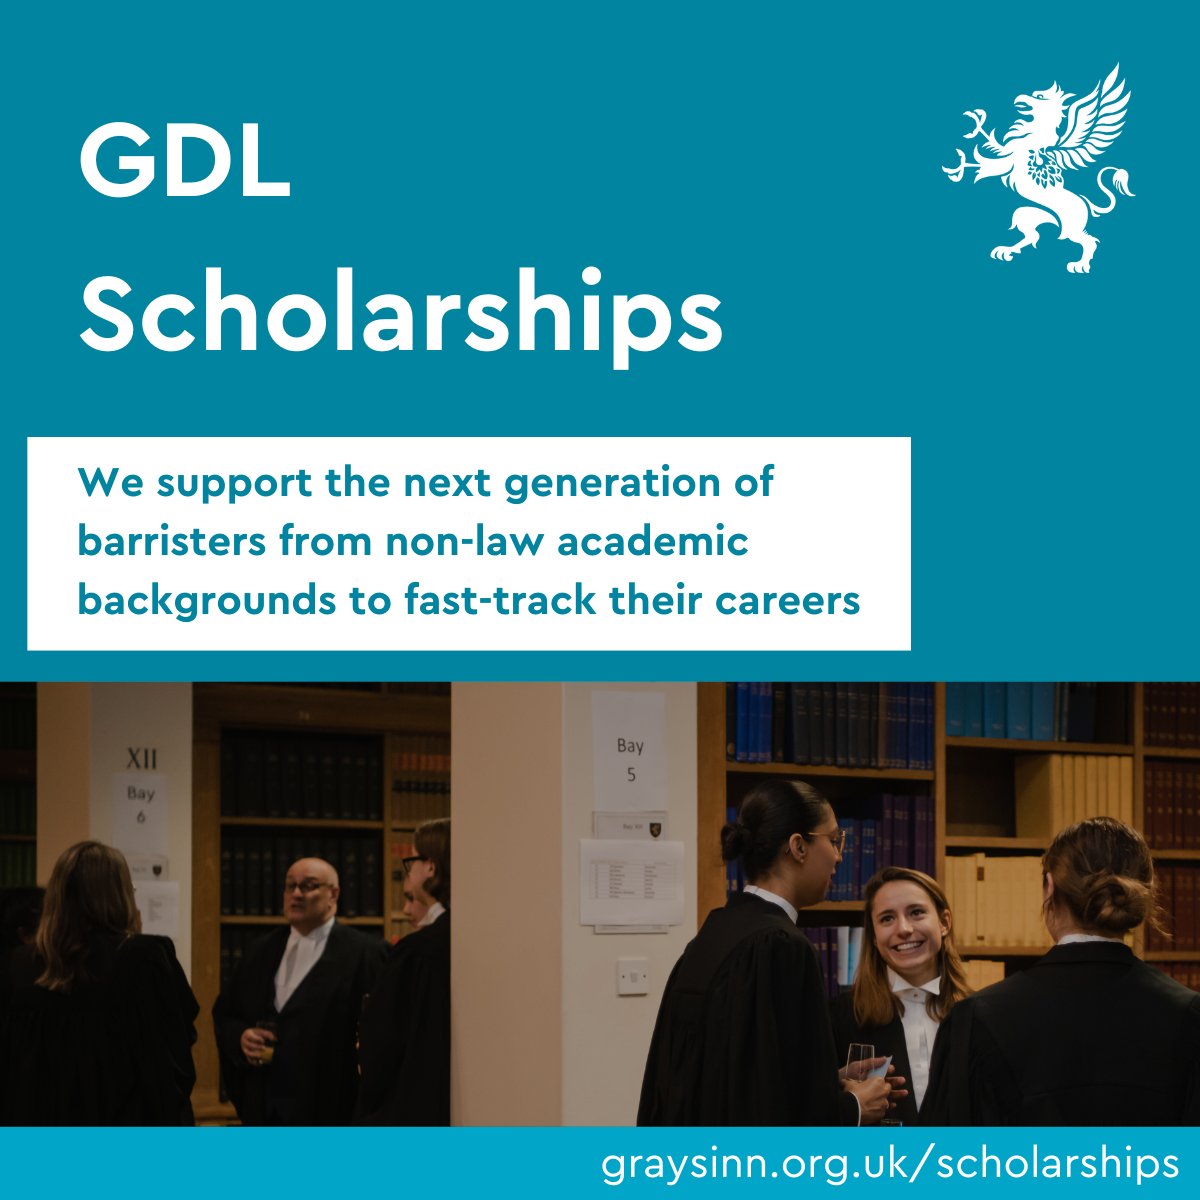 Our GDL Scholarships support non-law students access the profession ✨ We consider applications from candidates intending to study on any postgraduate course that qualifies a student to undertake the vocational component of Bar training. You’ve got this! 🙌